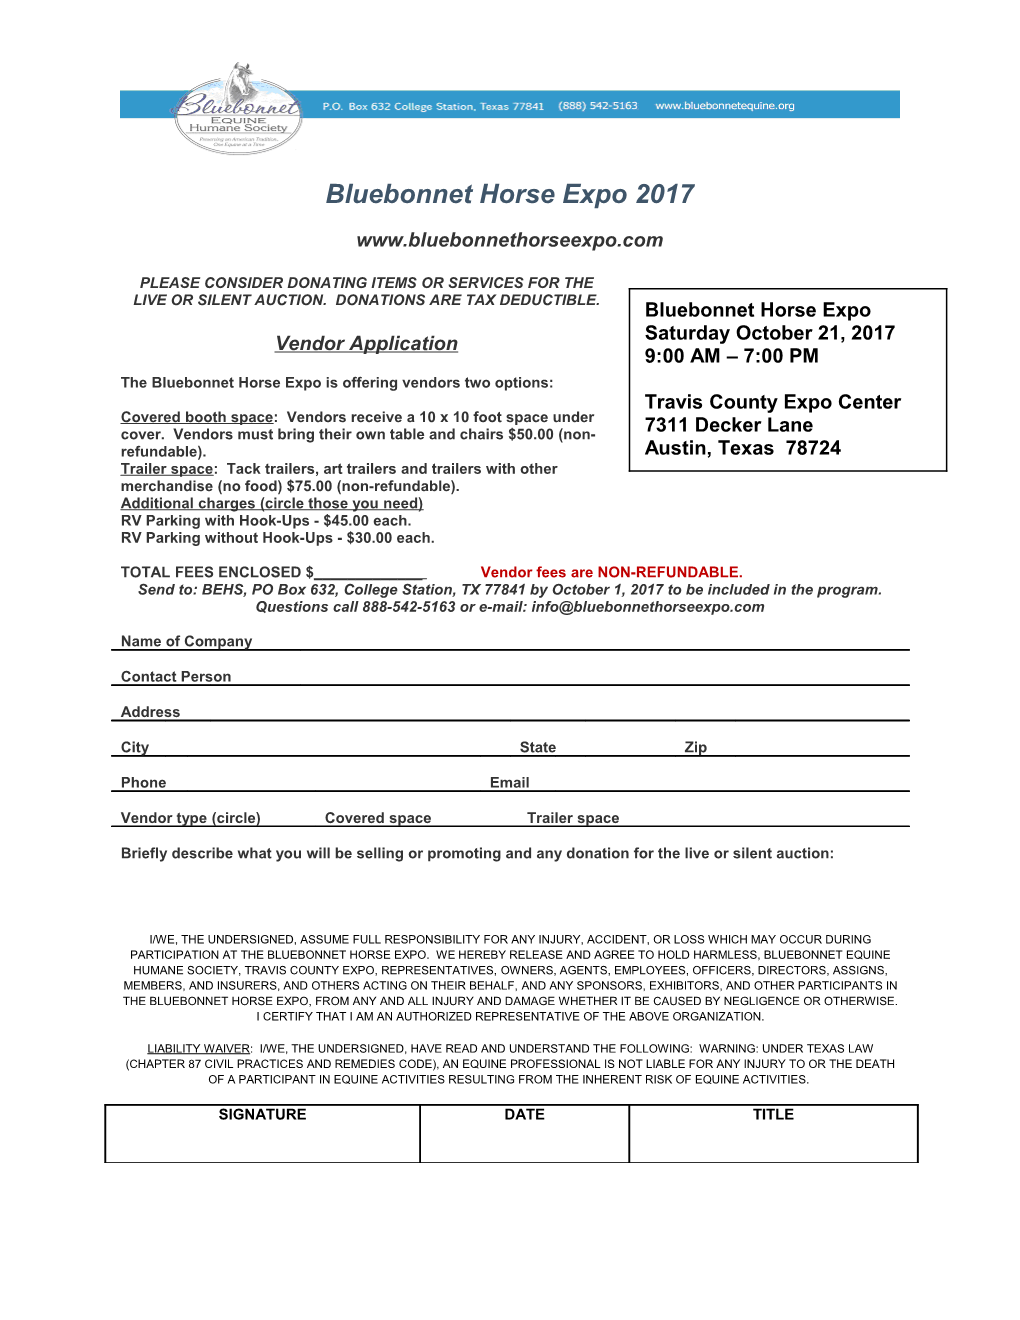 The Bluebonnet Horse Expo Is Offering Vendors Two Options